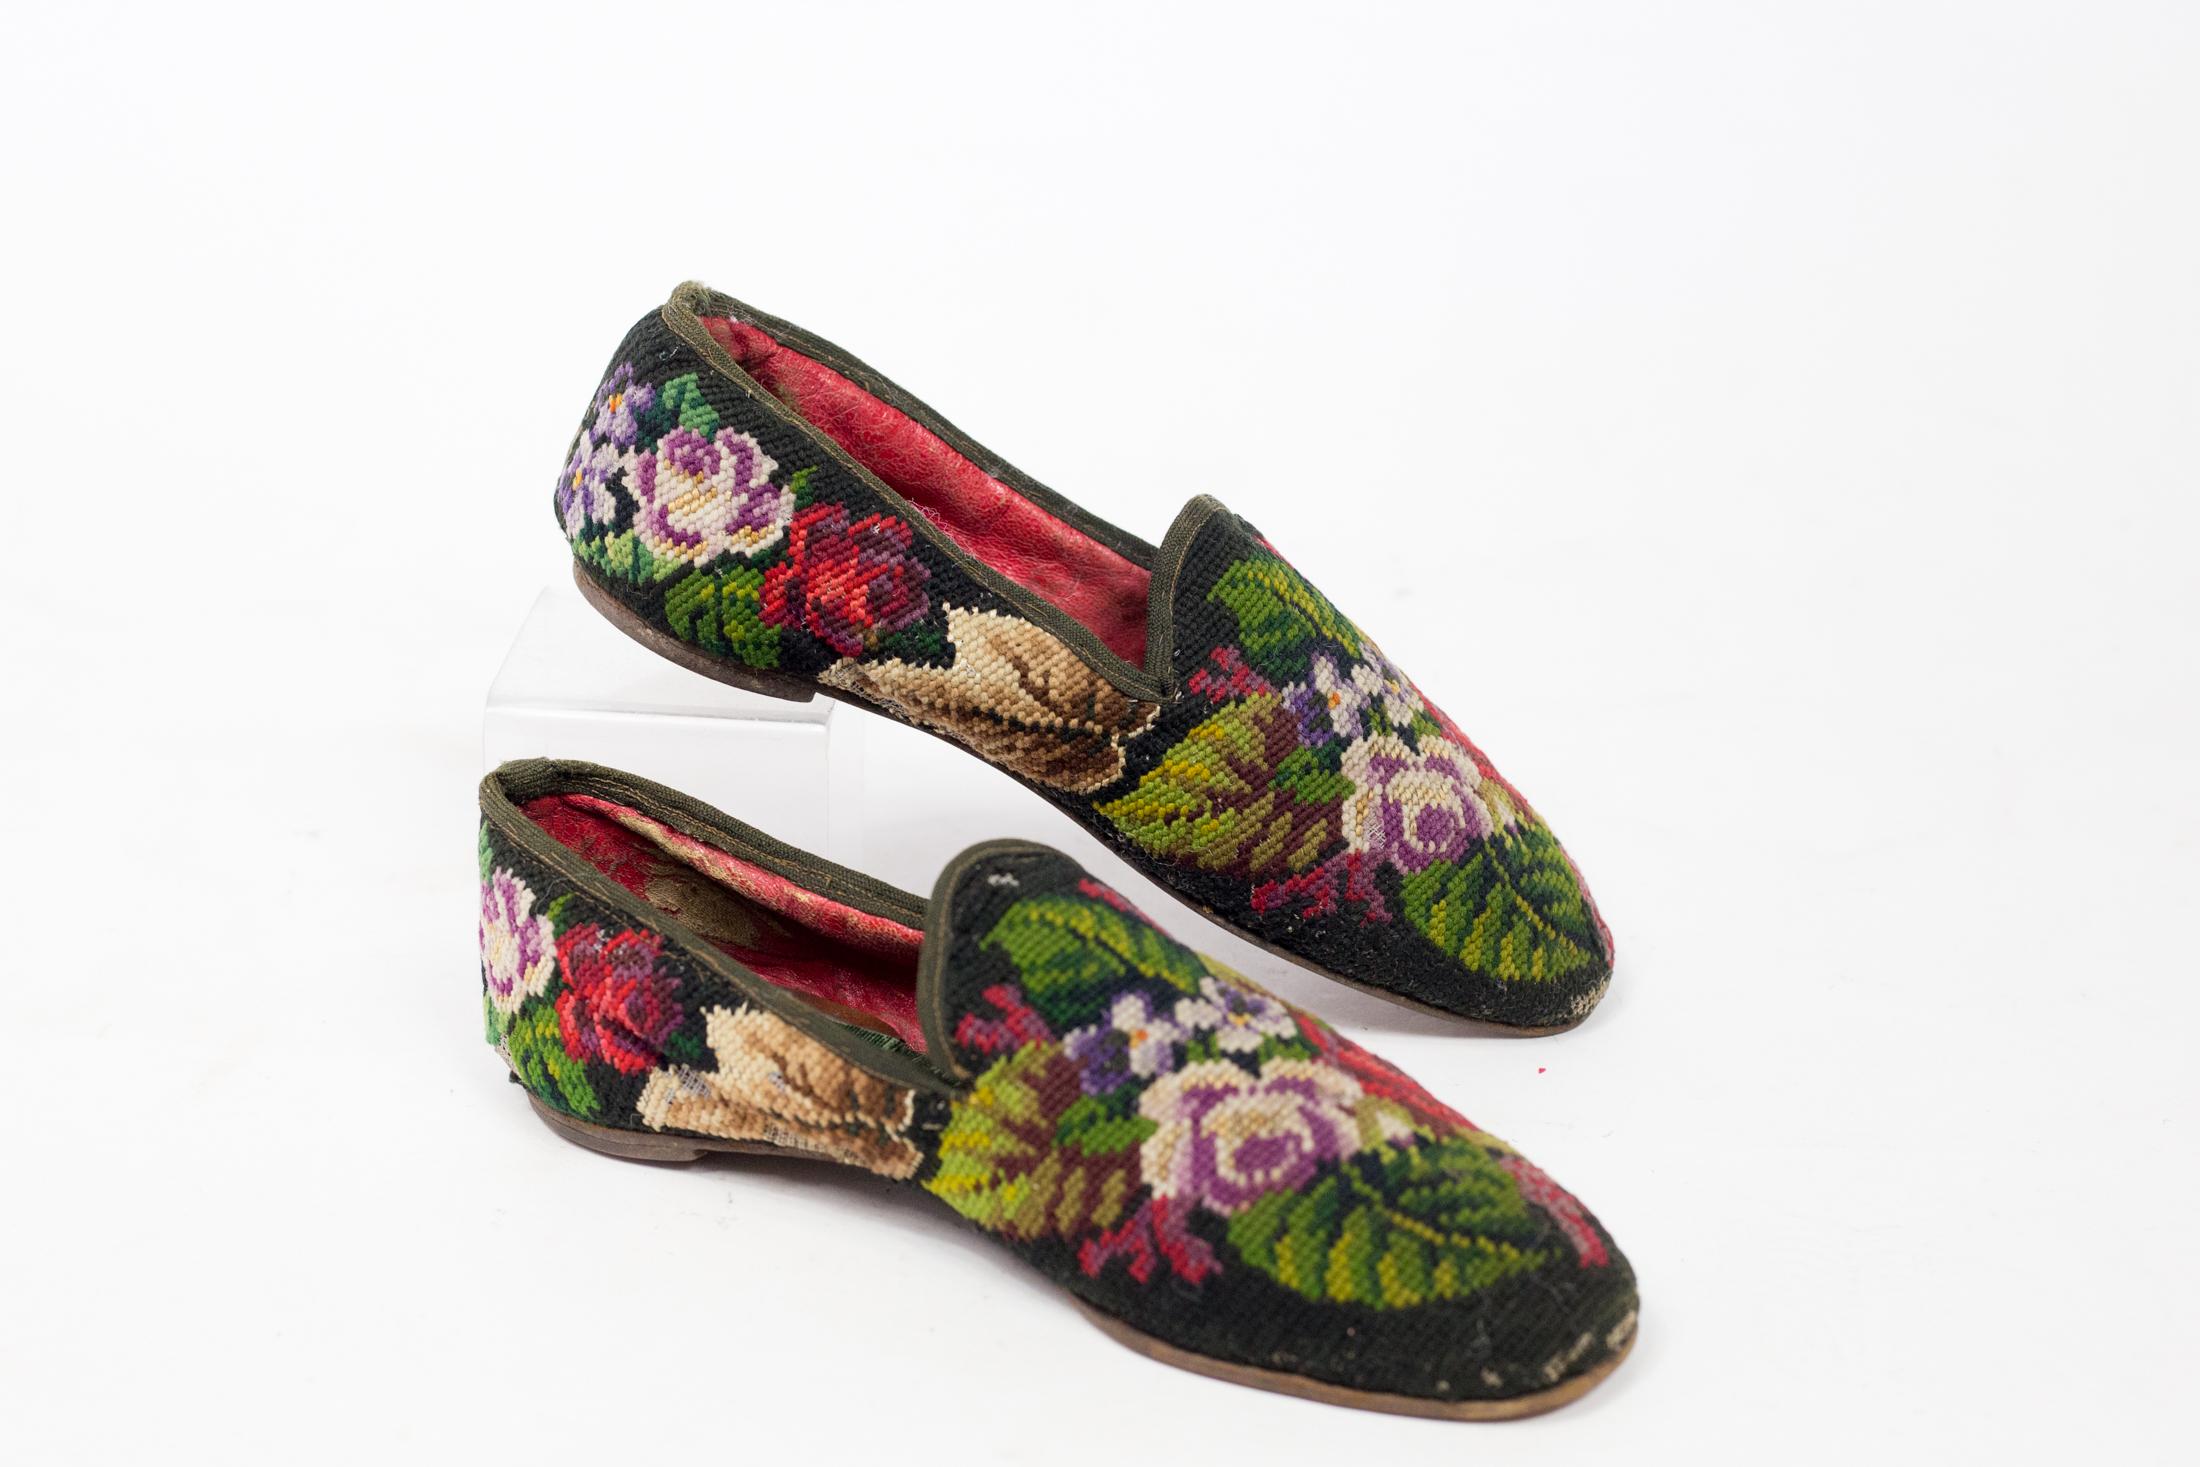 Pair of men's slippers in stitch point tapestry - France Circa 1860 4